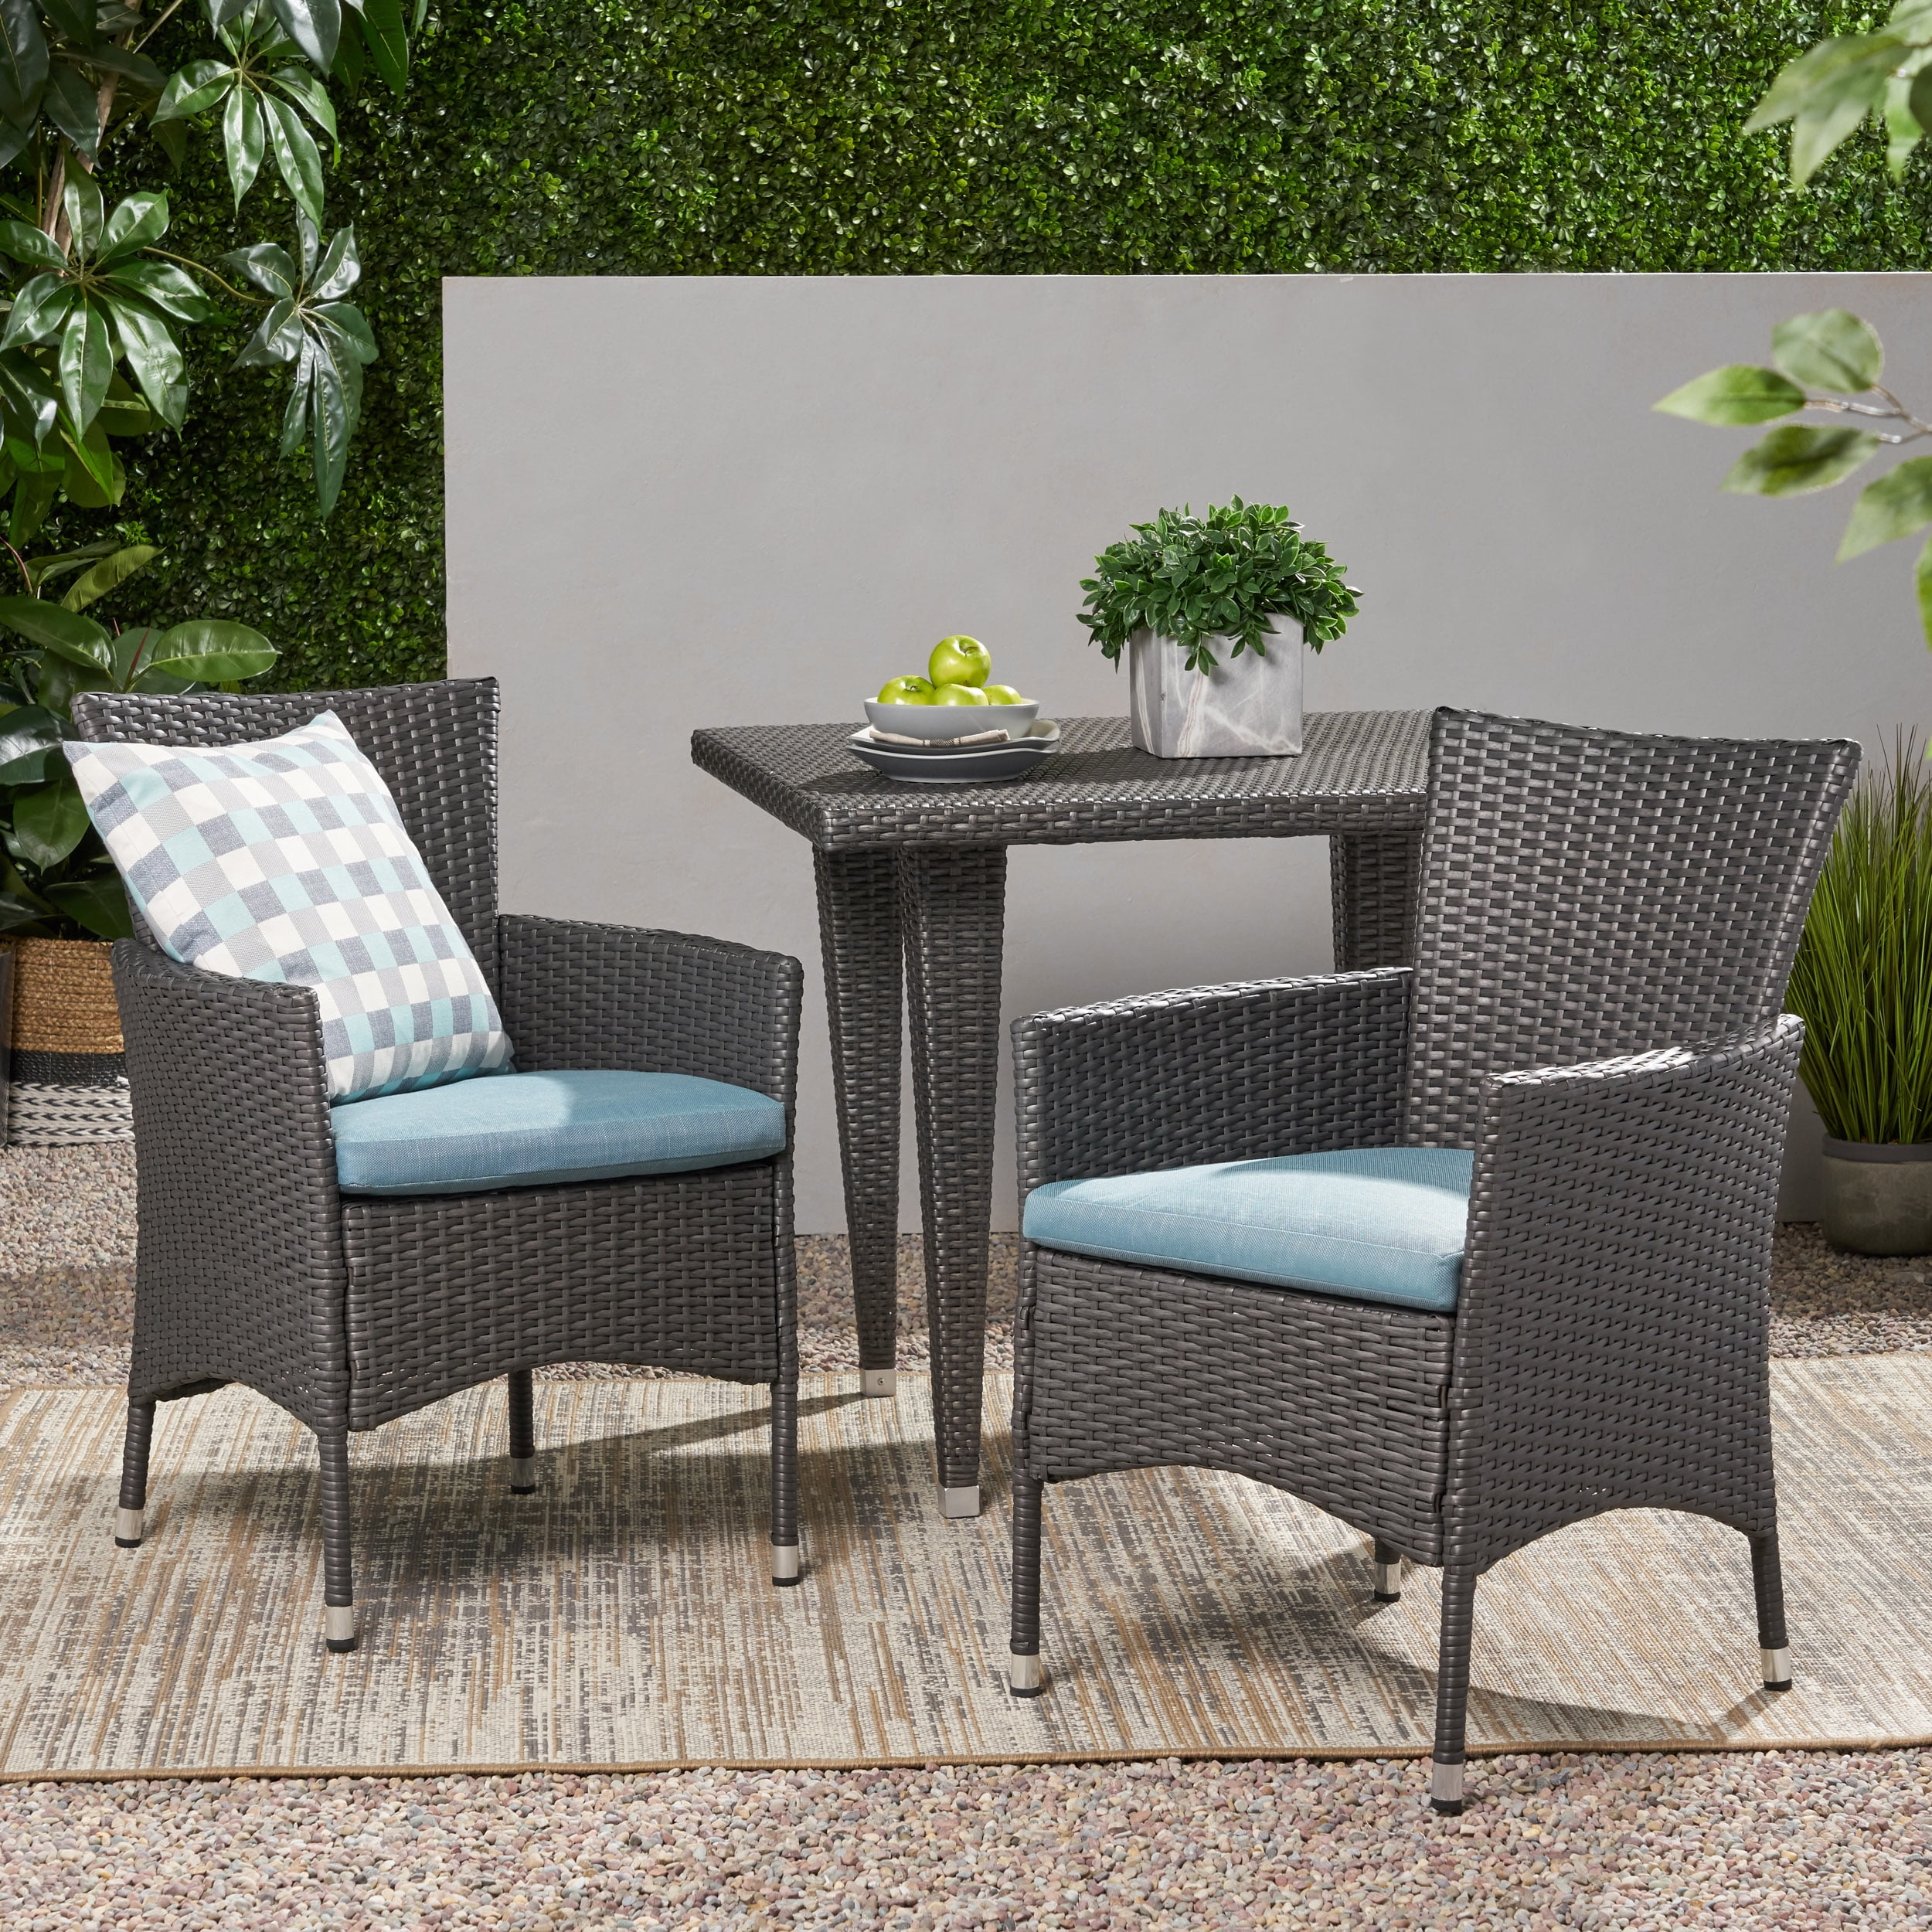 Camilo Outdoor Wicker Dining Chairs with Cushions, Set of 2, Grey, Teal